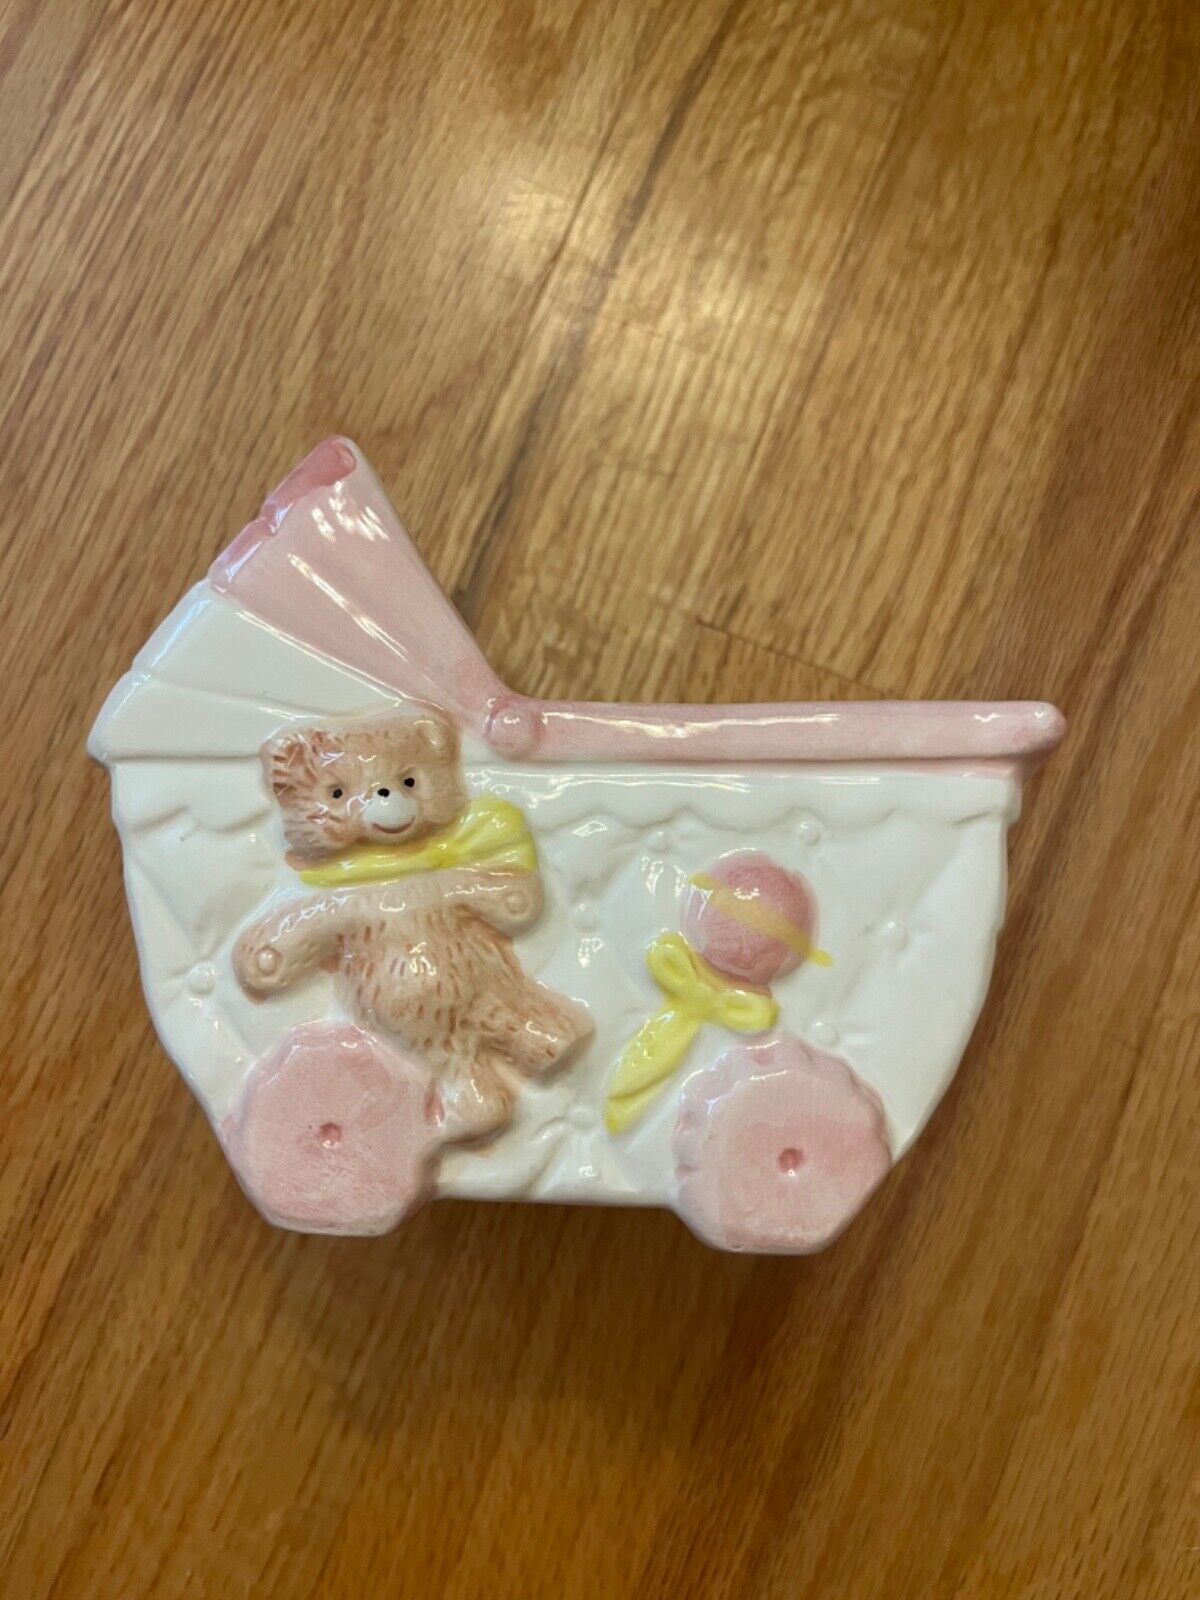 vintage baby girl ceramic carriage planter pink and white 